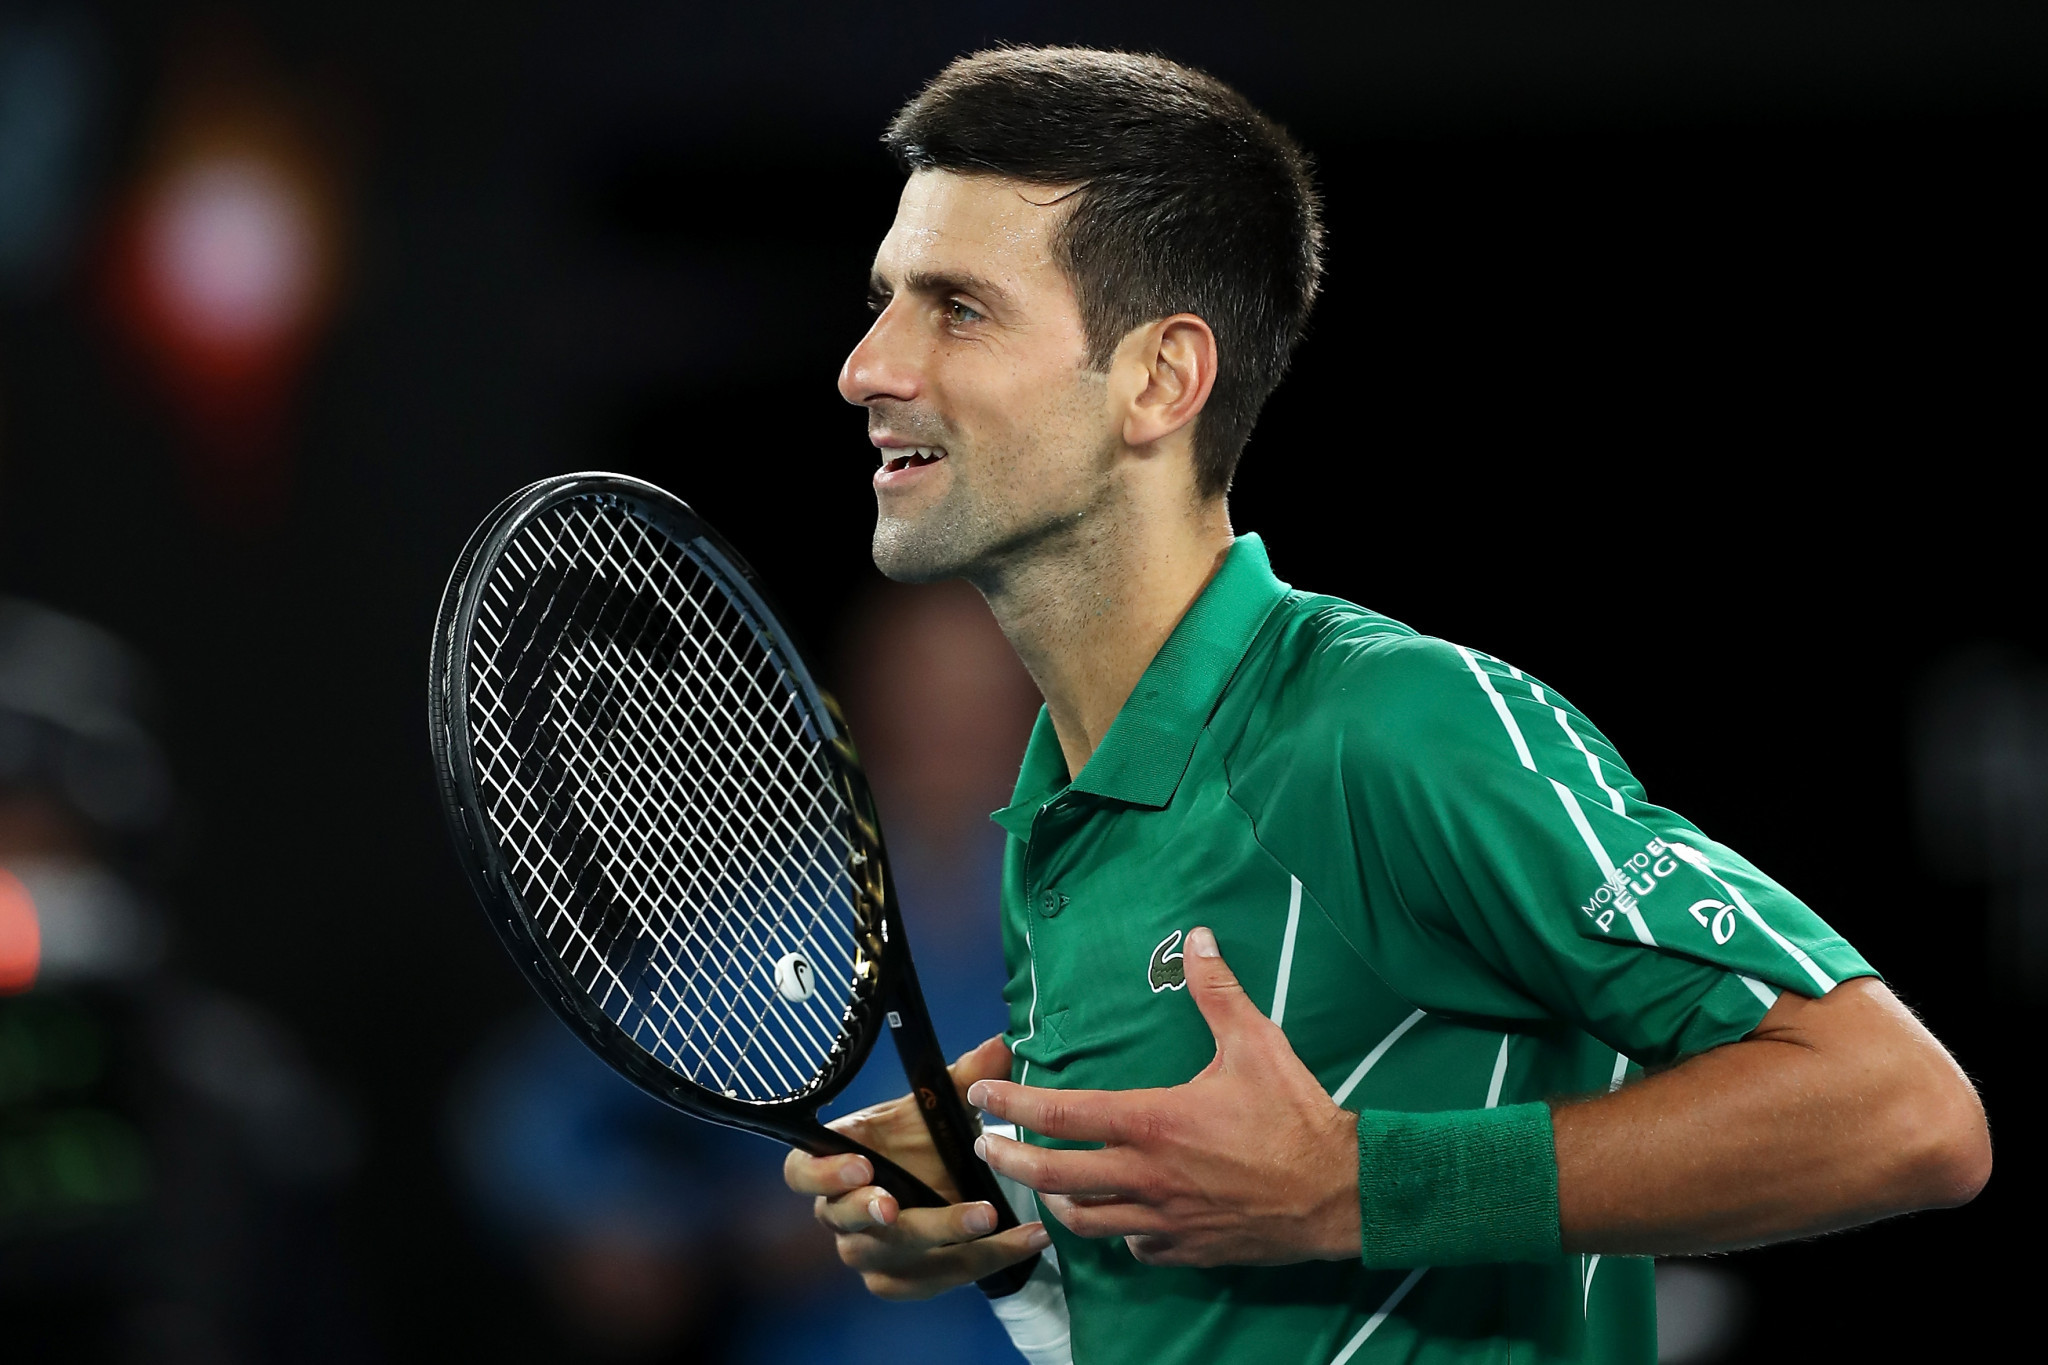 Novak Djokovic went through in four sets ©Getty Images